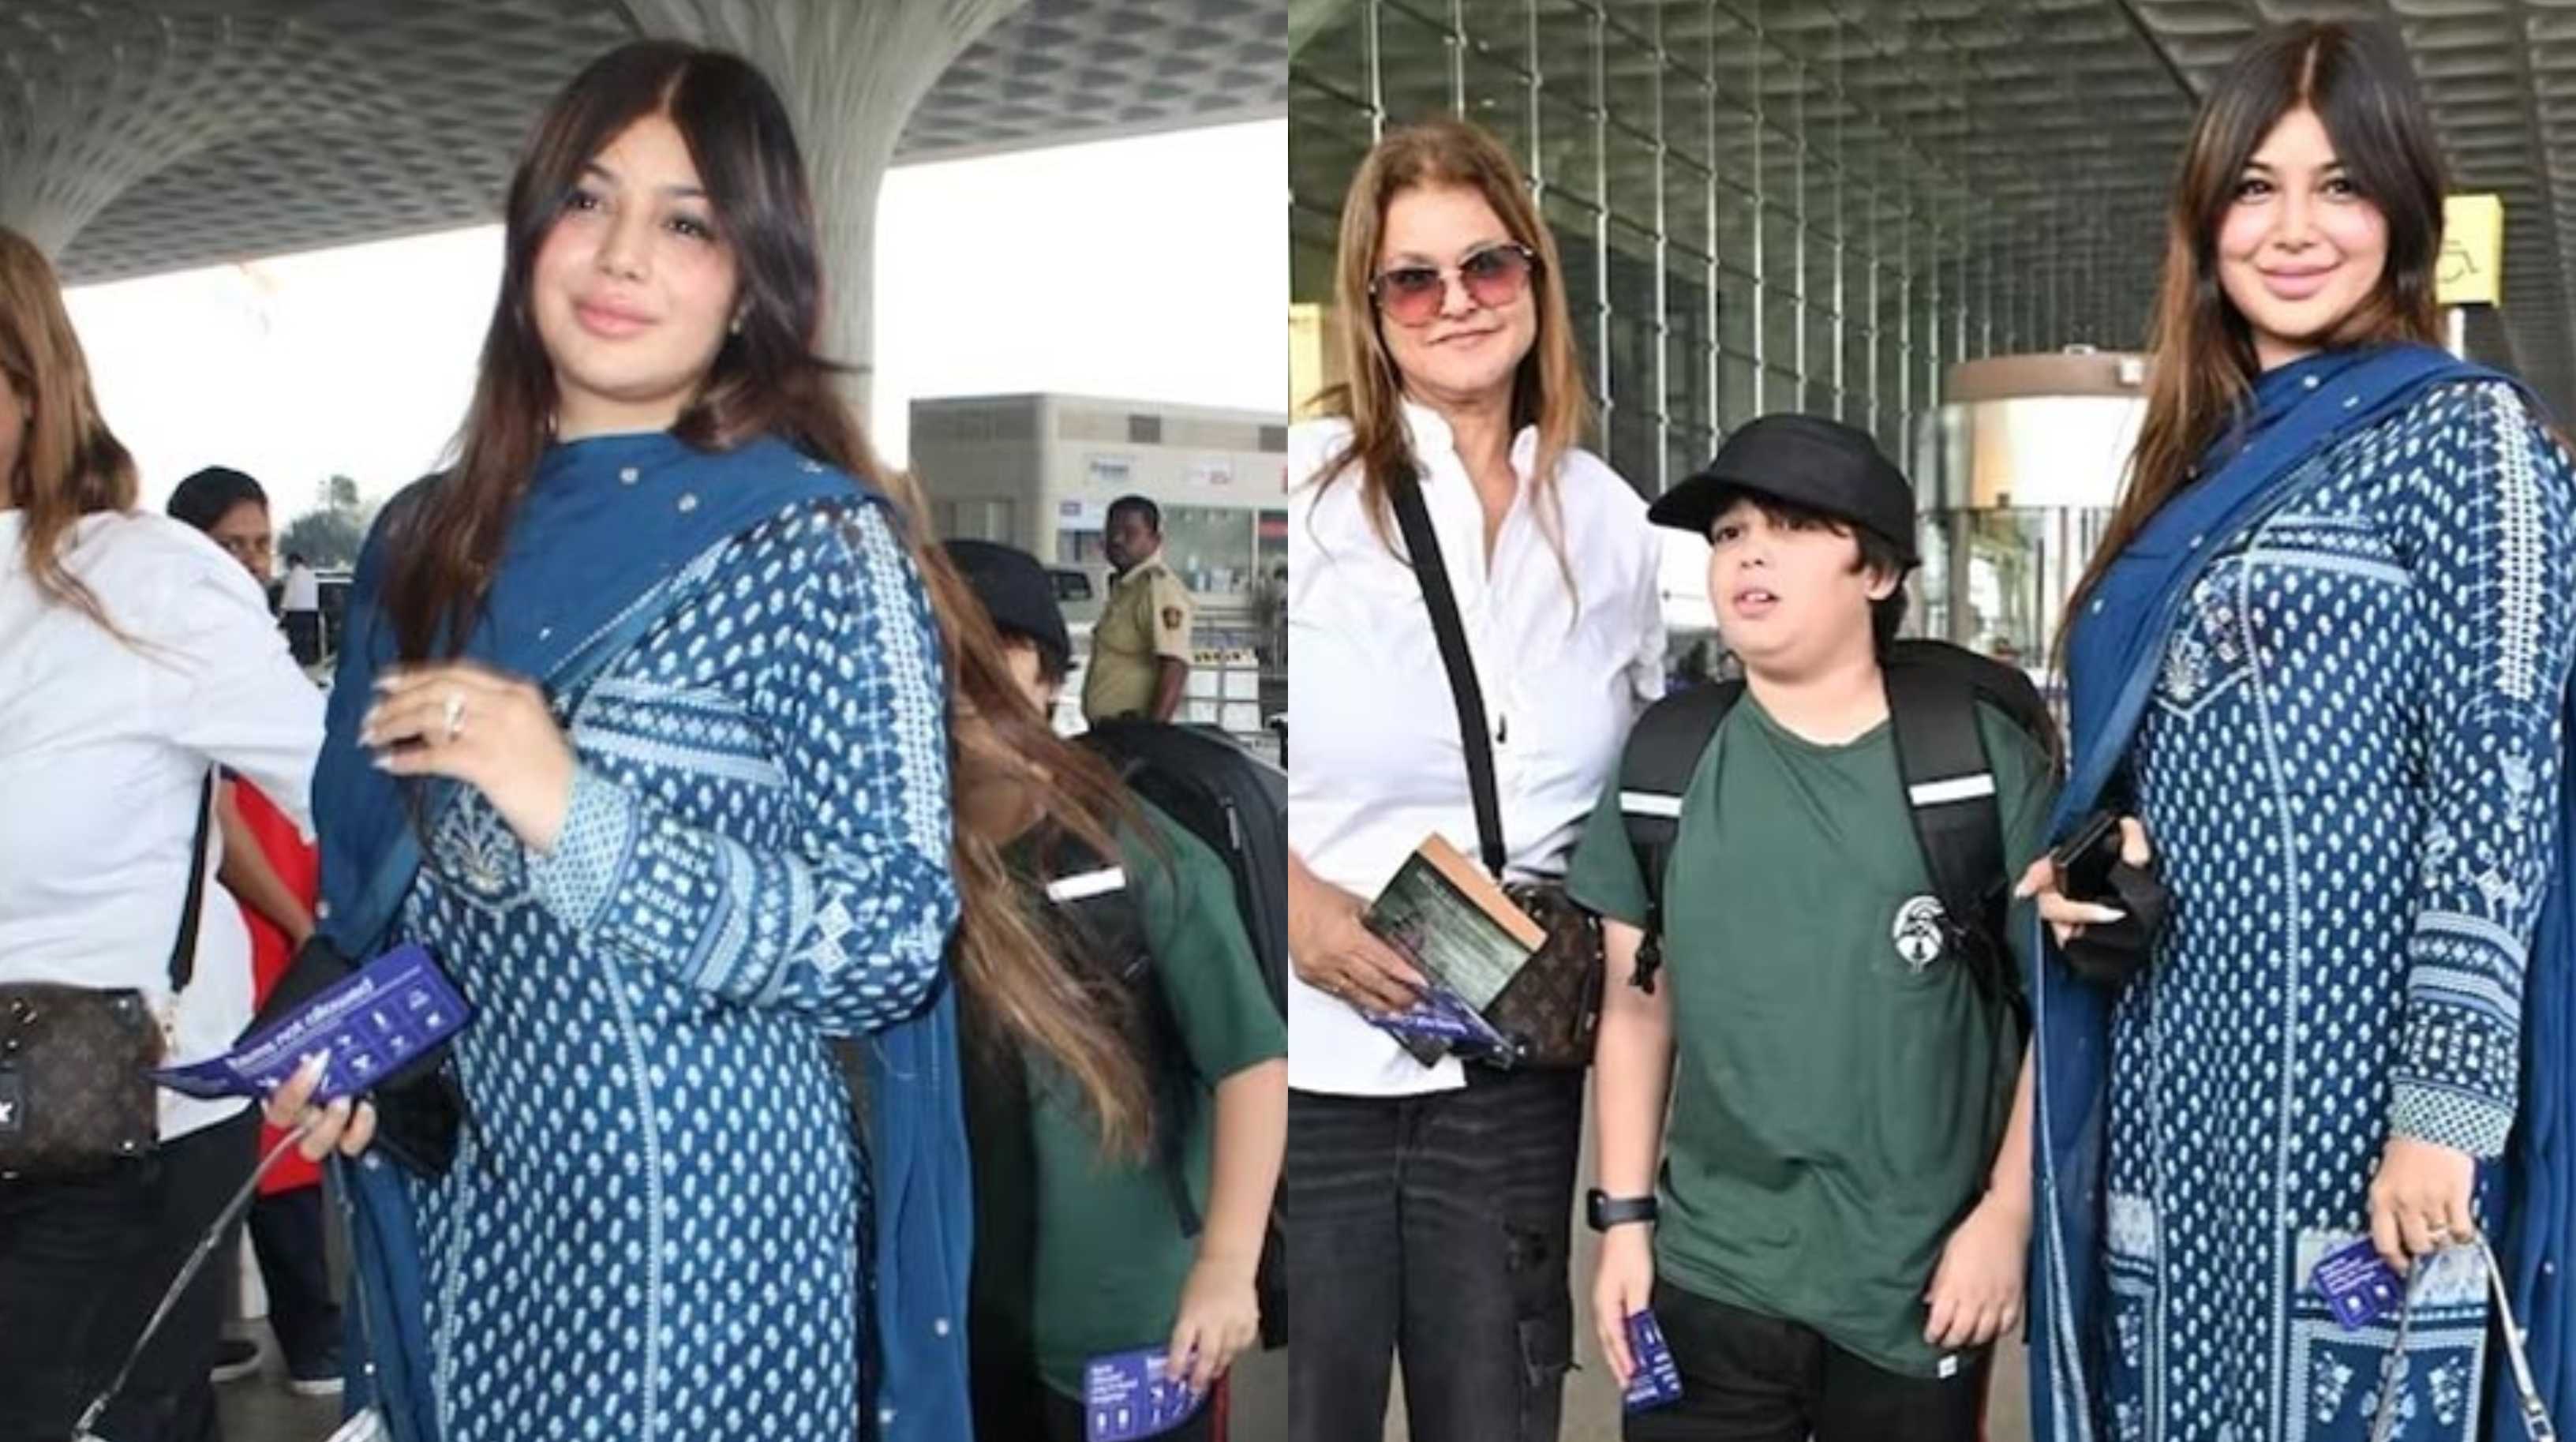 ‘Pls feel free to not care about me’: Ayesha Takia hits back at trolls dissecting her looks after recent spotting